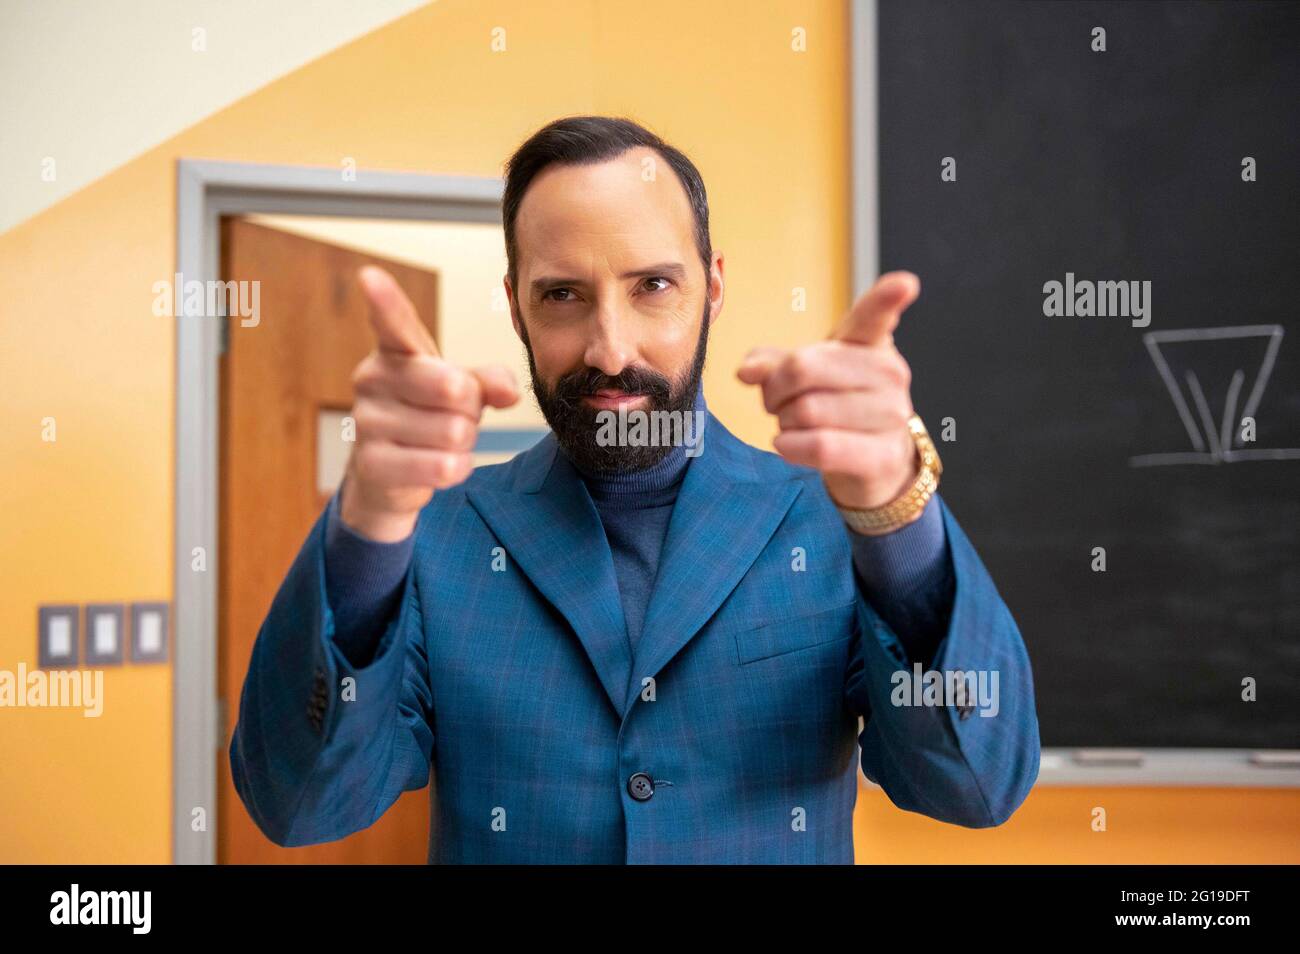 TONY HALE in THE MYSTERIOUS BENEDICT SOCIETY (2021) -Original title: A MISTERIOSA SOCIEDADE BENEDICT-, directed by JAMES BOBIN. Credit: Walt Disney Television / 20th Television / Album Stock Photo